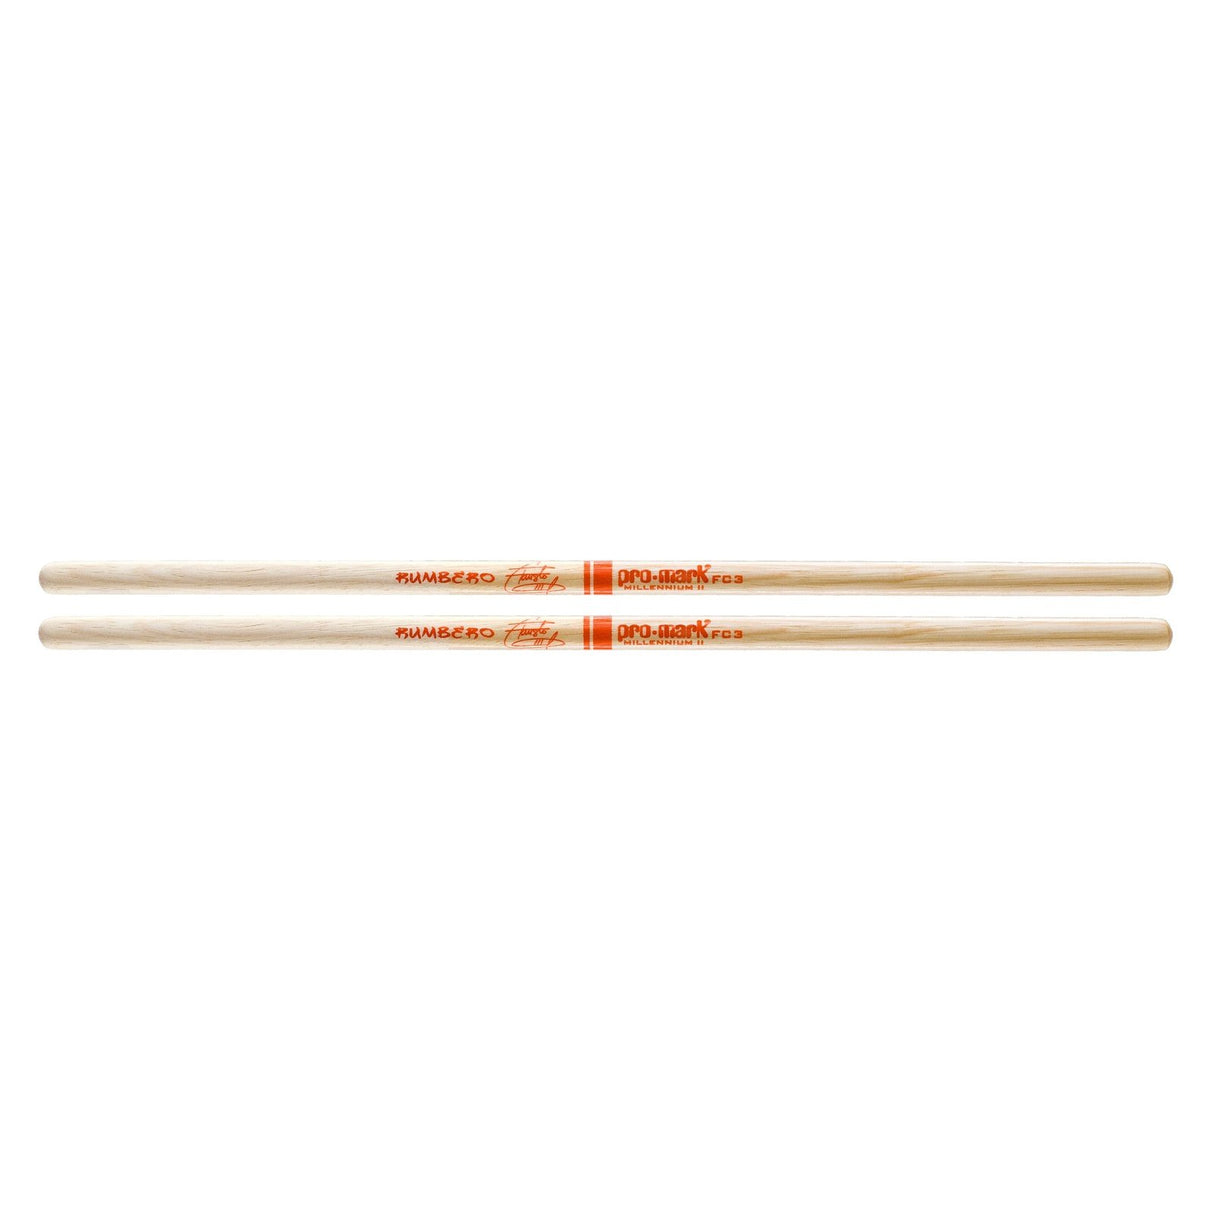 Promark Hickory Fausto Cuevas FC3 Timbale Stick